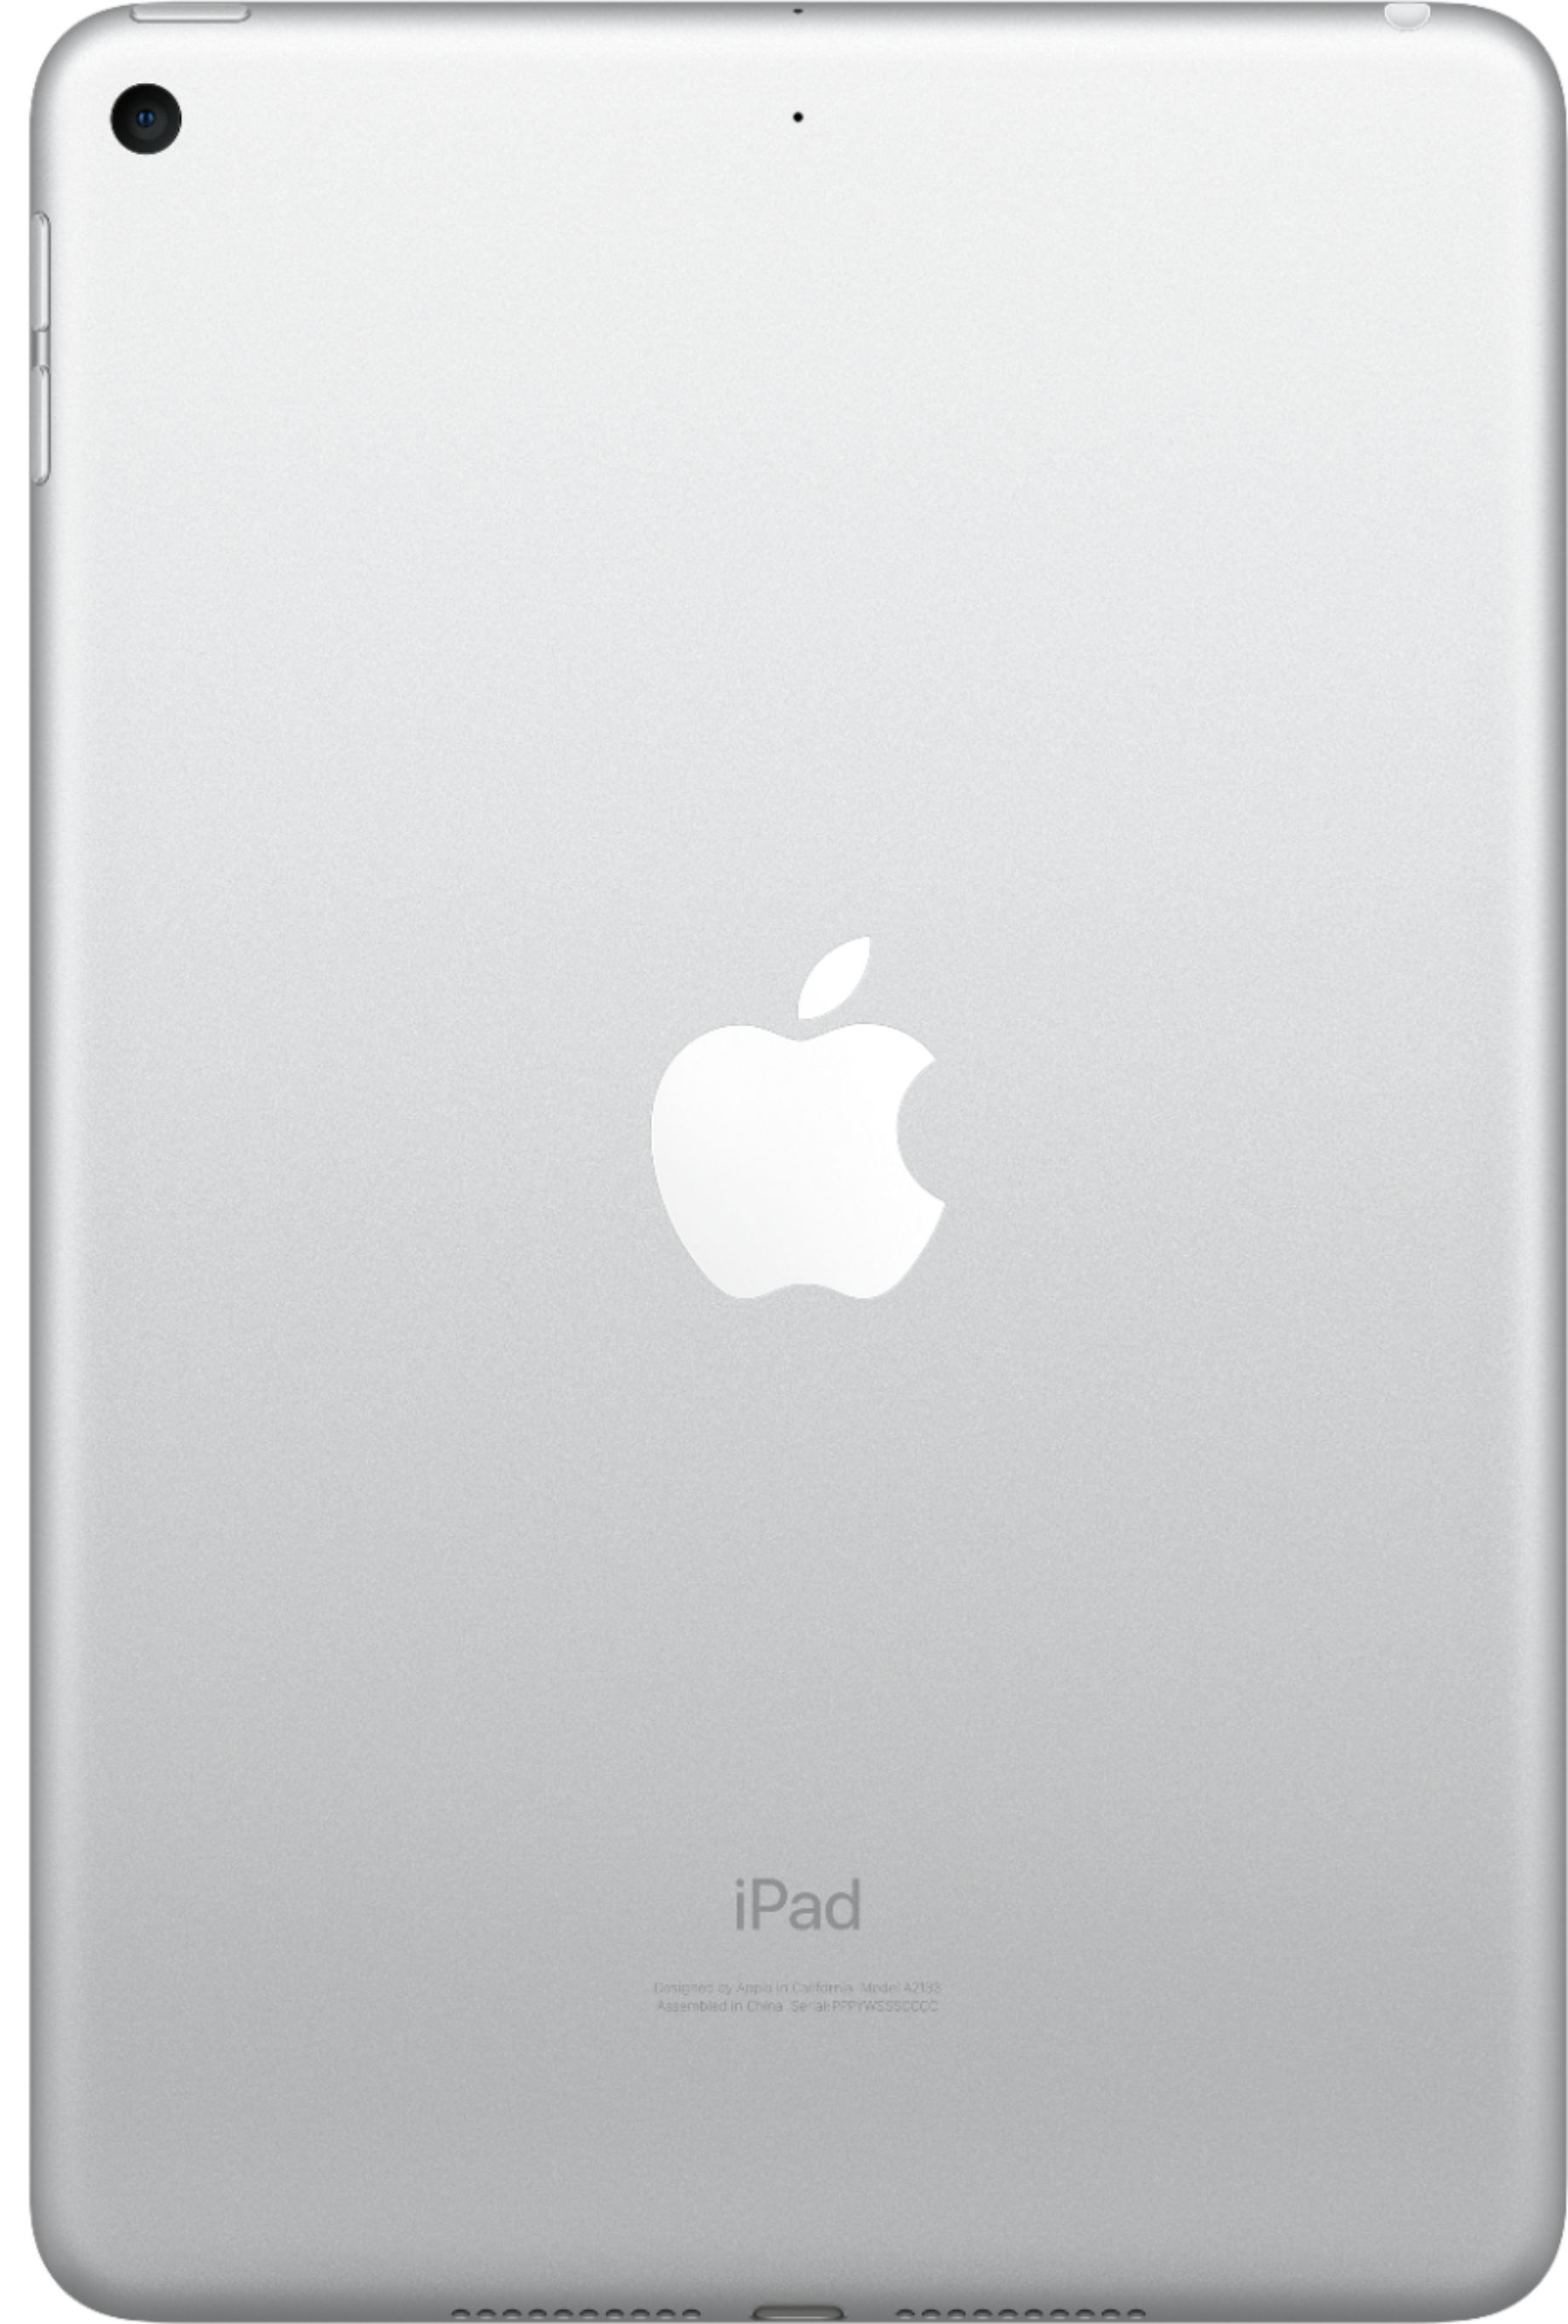 Back View: AppleCare+ for iPad - Monthly Plan